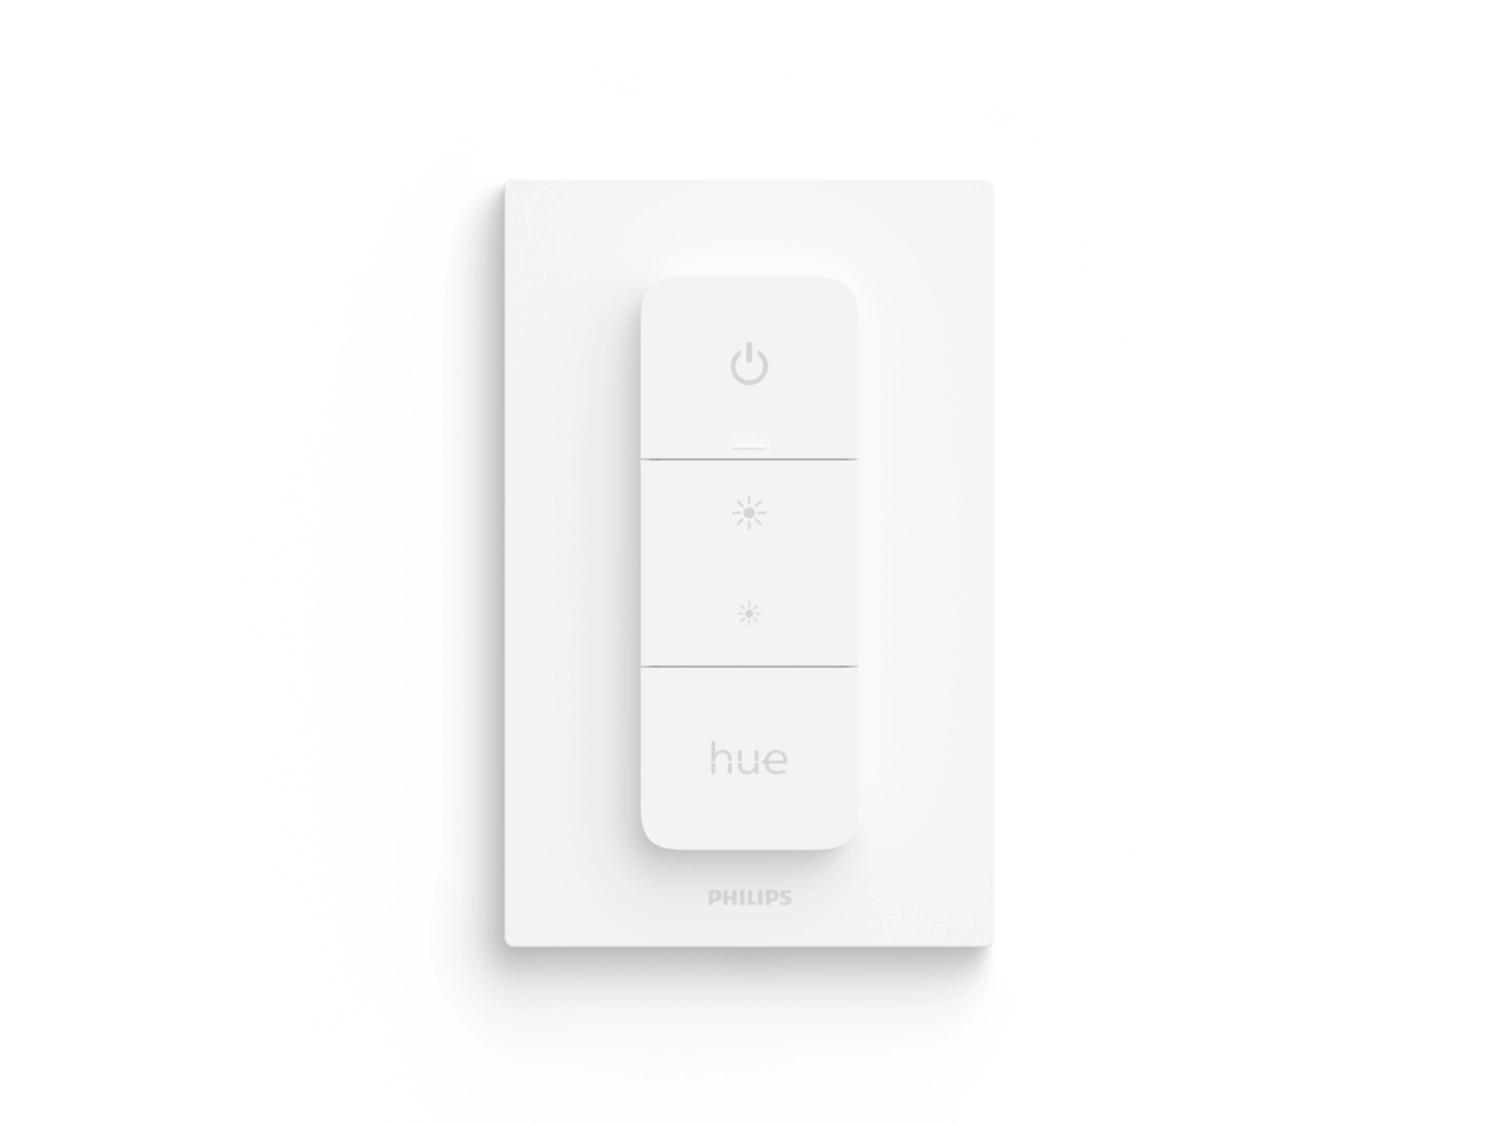 The smart light switch with Remote lets you control your Hue lights easily with a required Hue Bridge